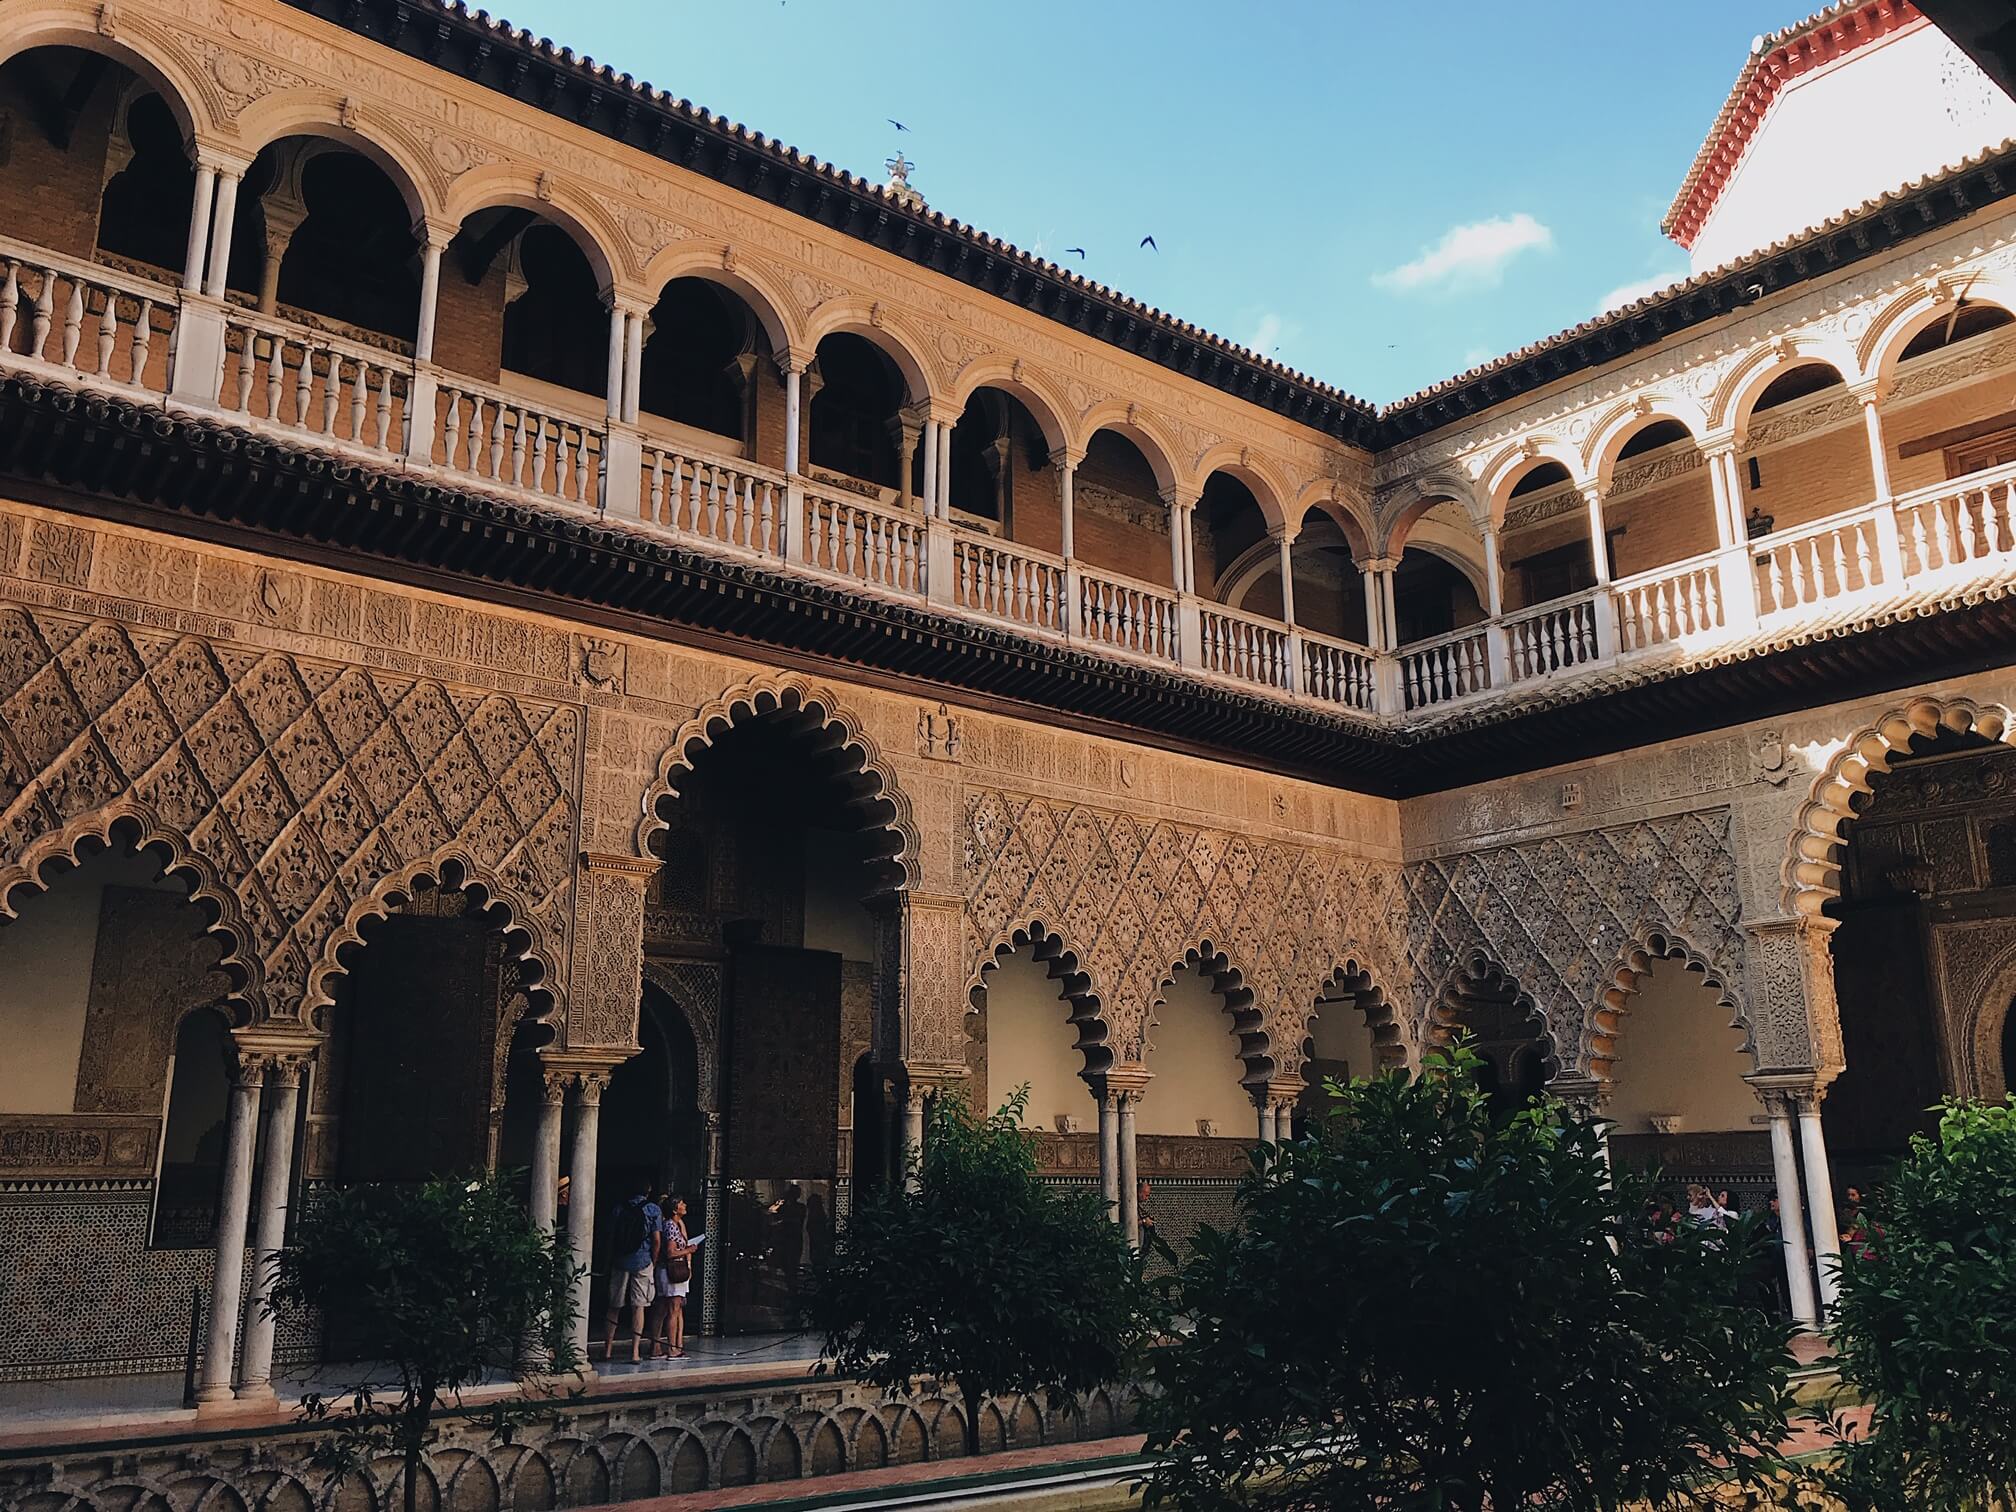 Real Alcazar Things to do in seville